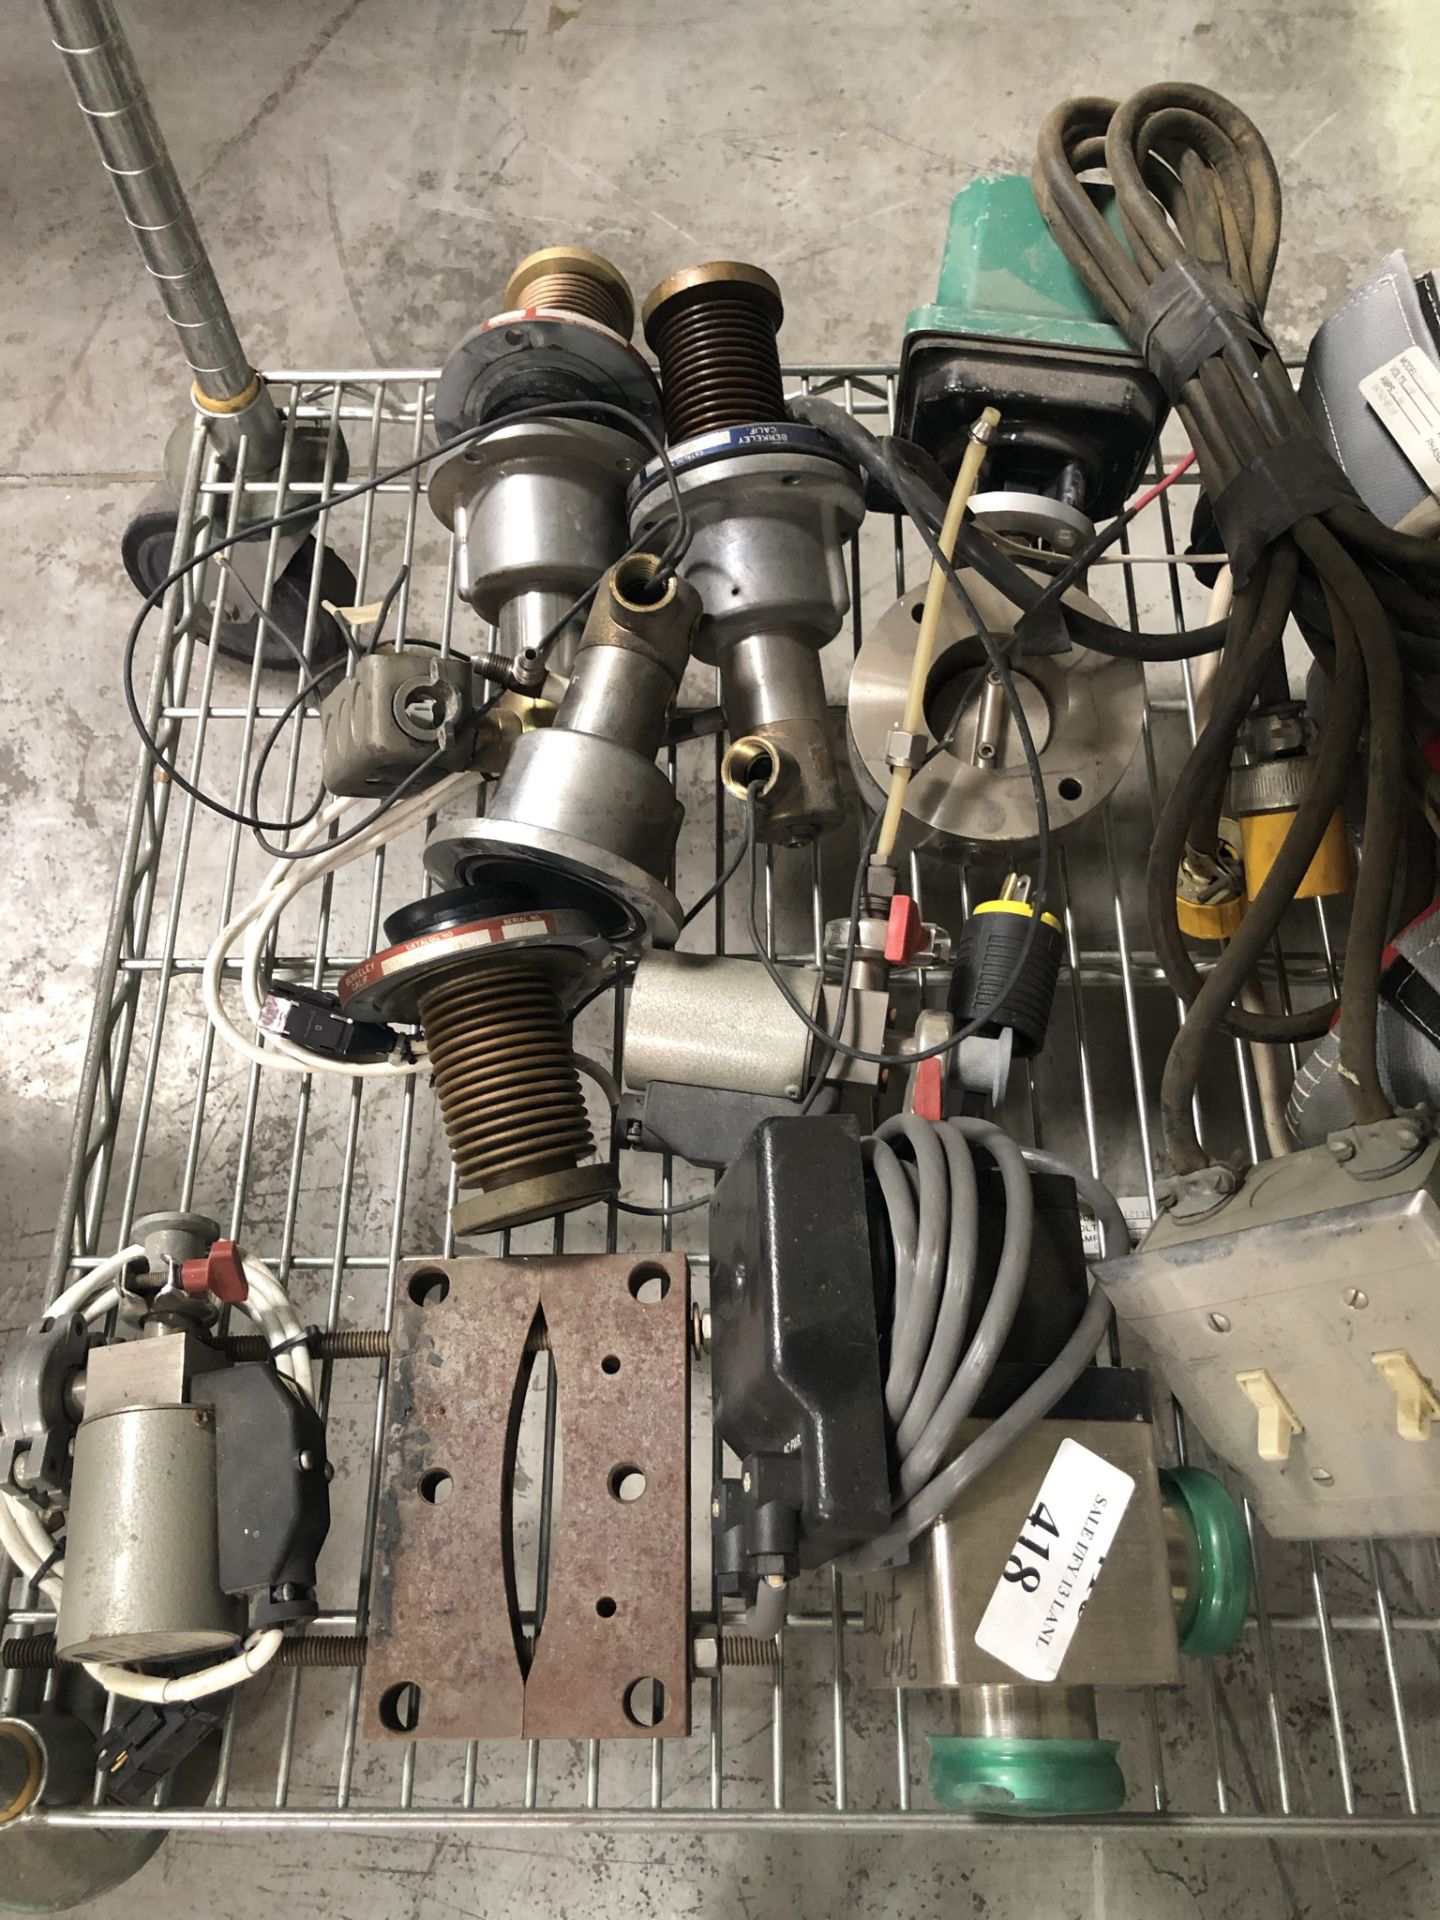 MISC lot of vauum fittings, Varian ion pump, 6" flanged elbow, MKS bake out heaters, more included - Image 2 of 5